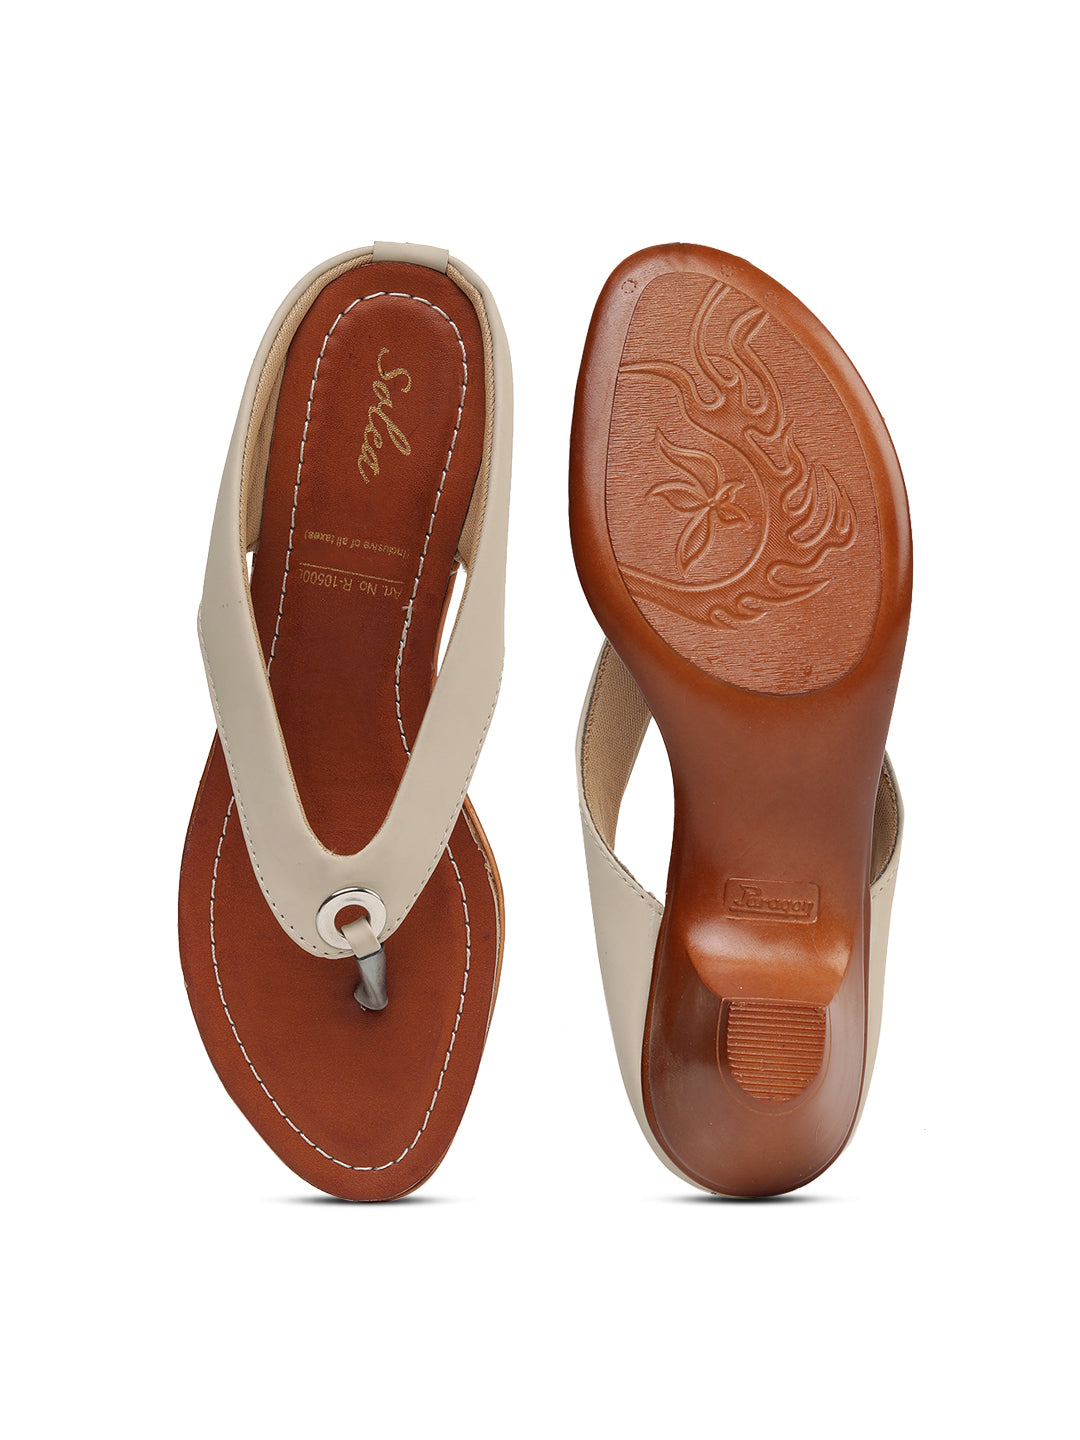 Paragon R10500L Women Sandals | Casual &amp; Formal Sandals | Stylish, Comfortable &amp; Durable | For Daily &amp; Occasion Wear